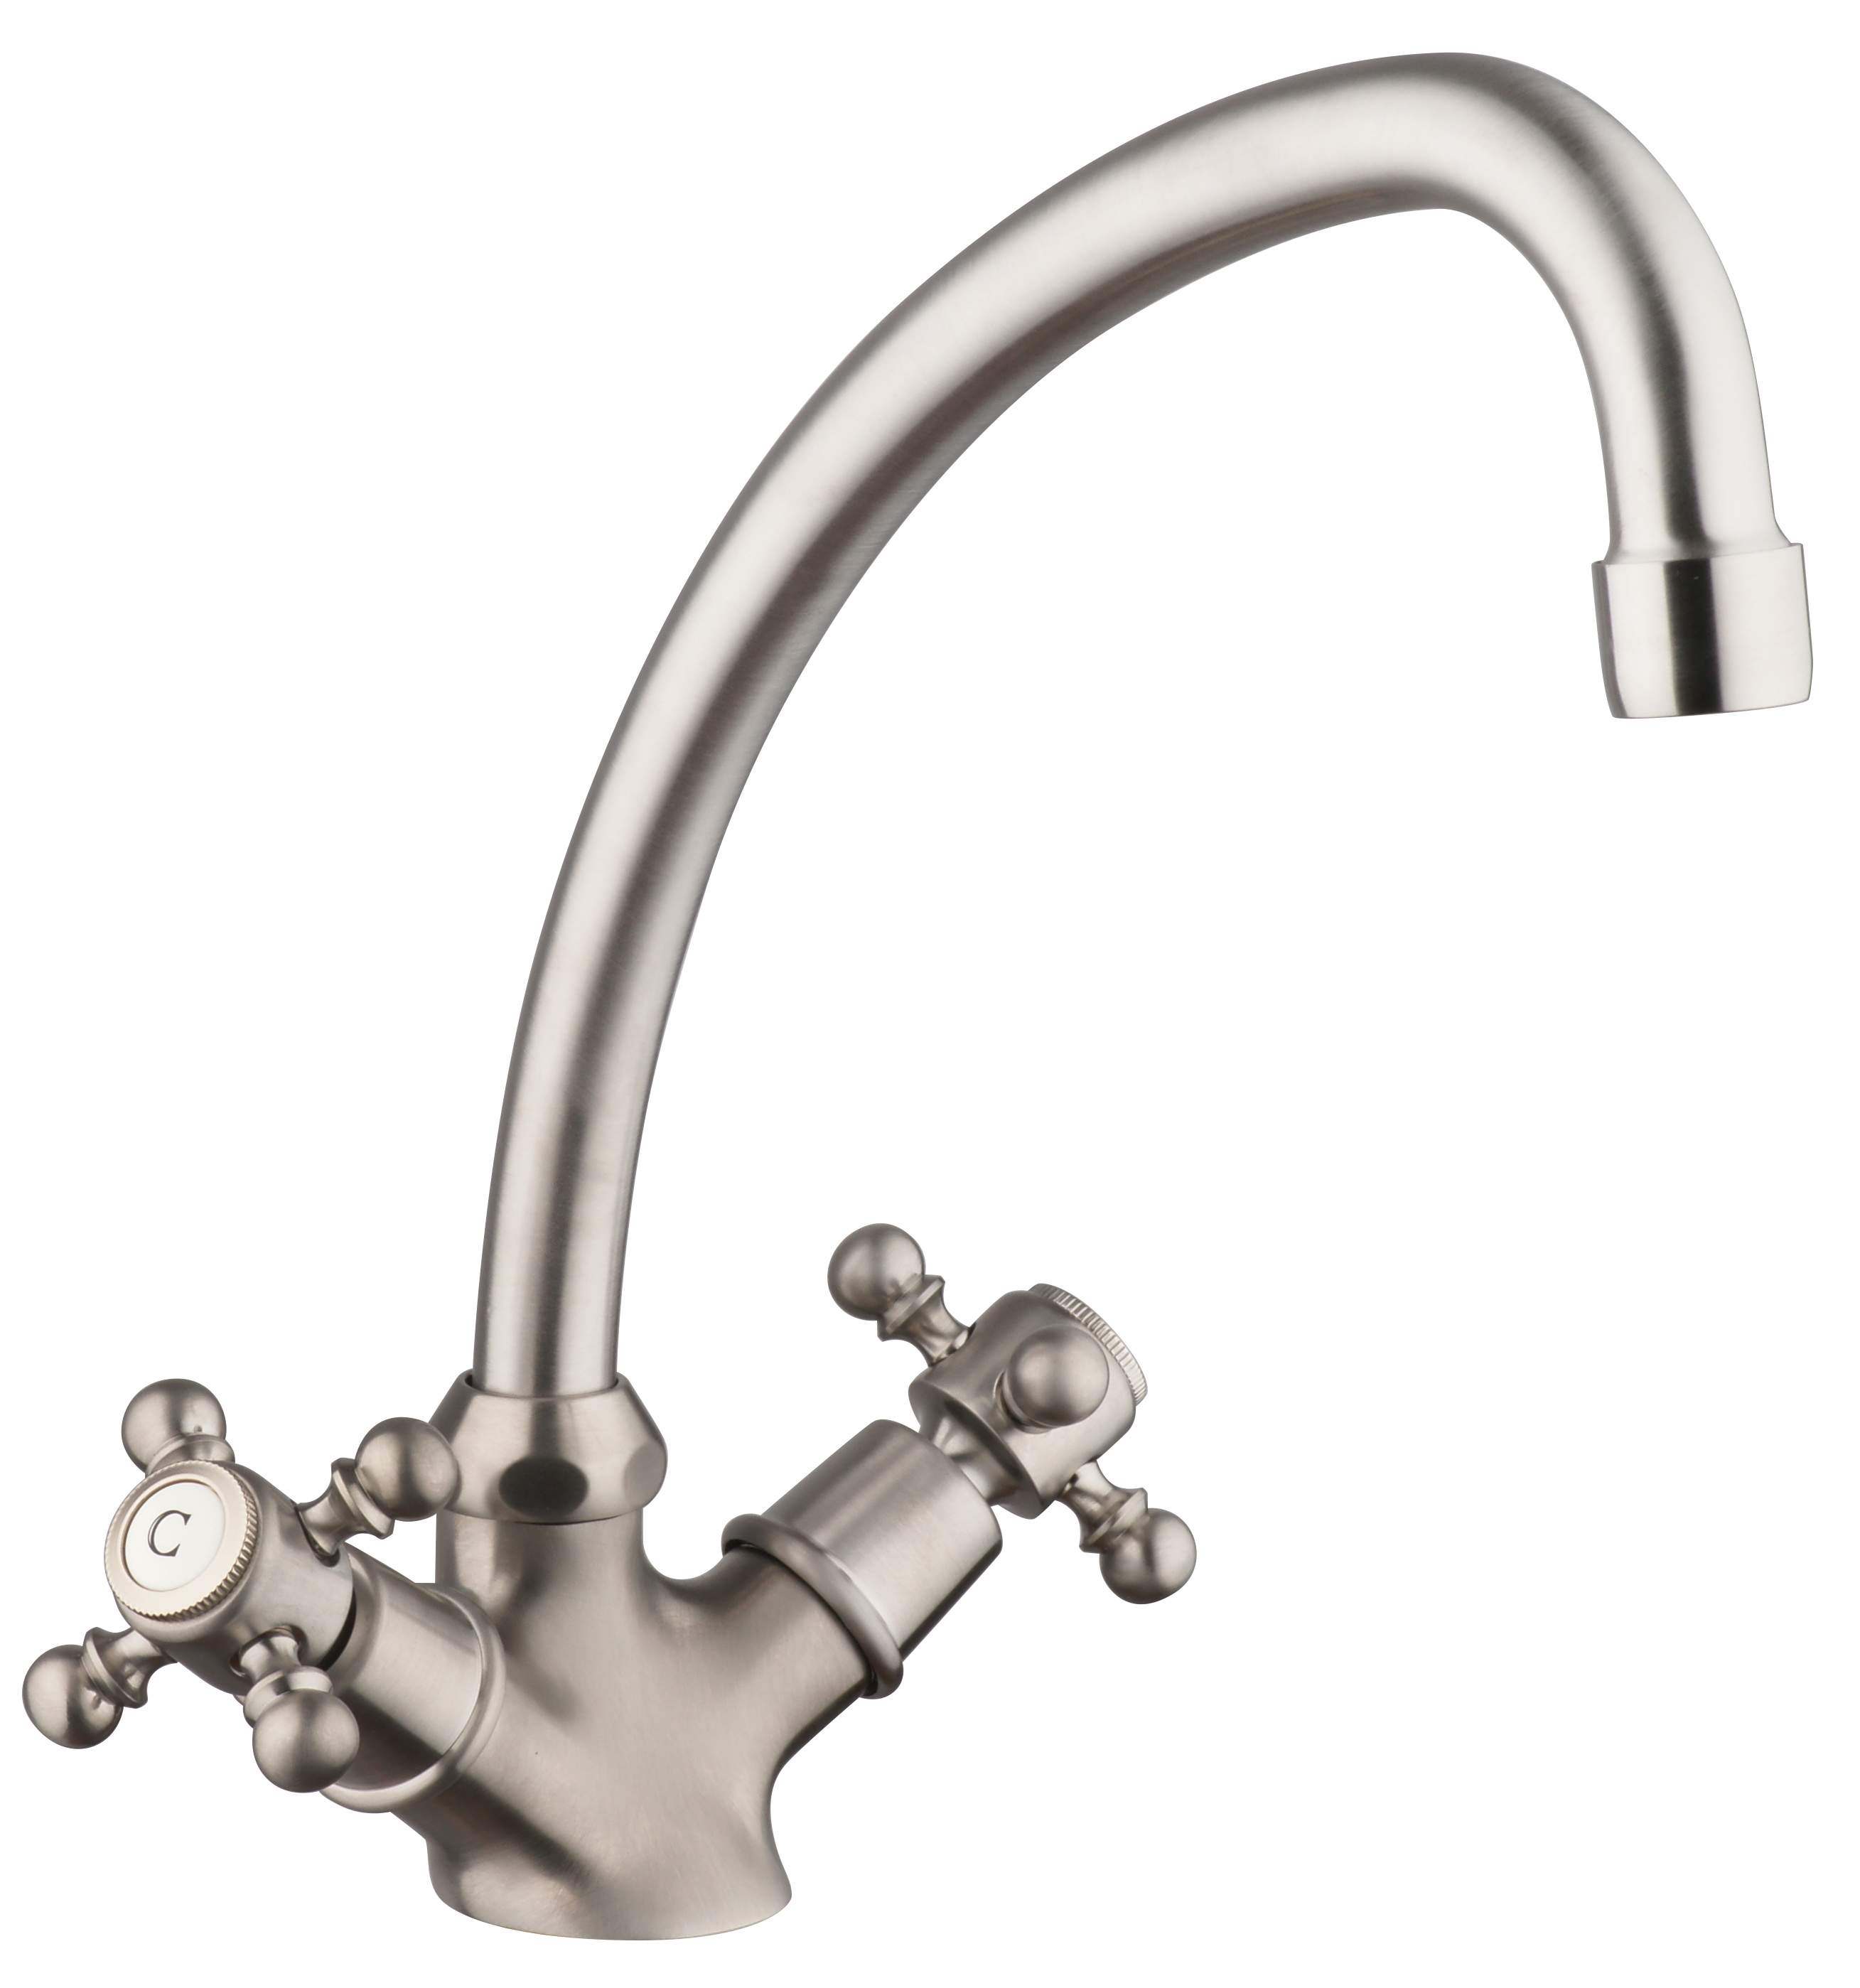 Sink mixer with movable spout, steel grey